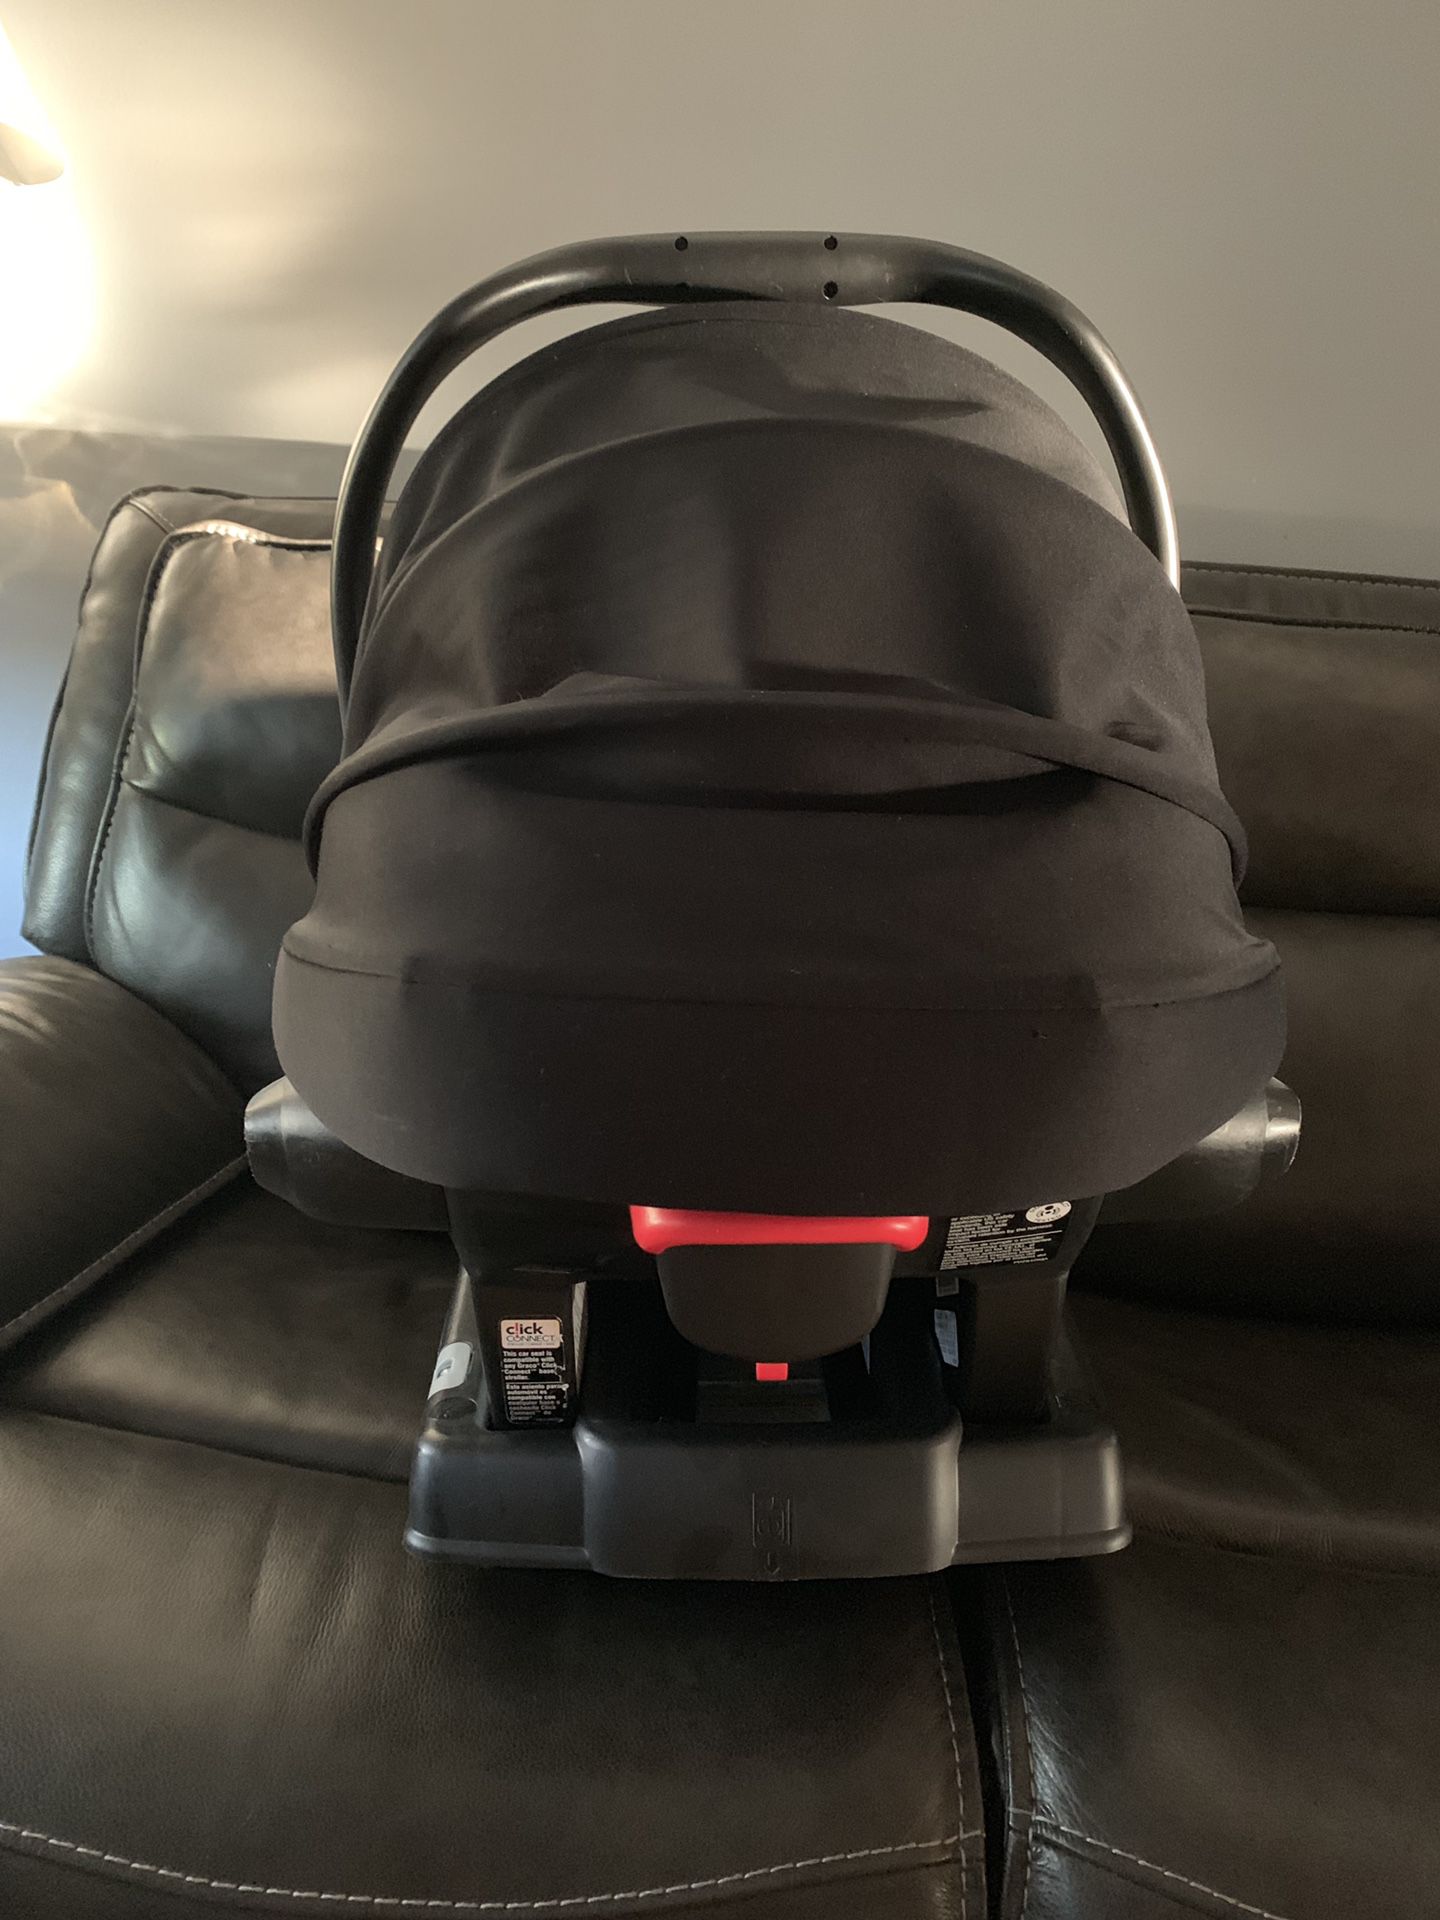 Graco infant car seat and base, black. Original purchase price $250.00.